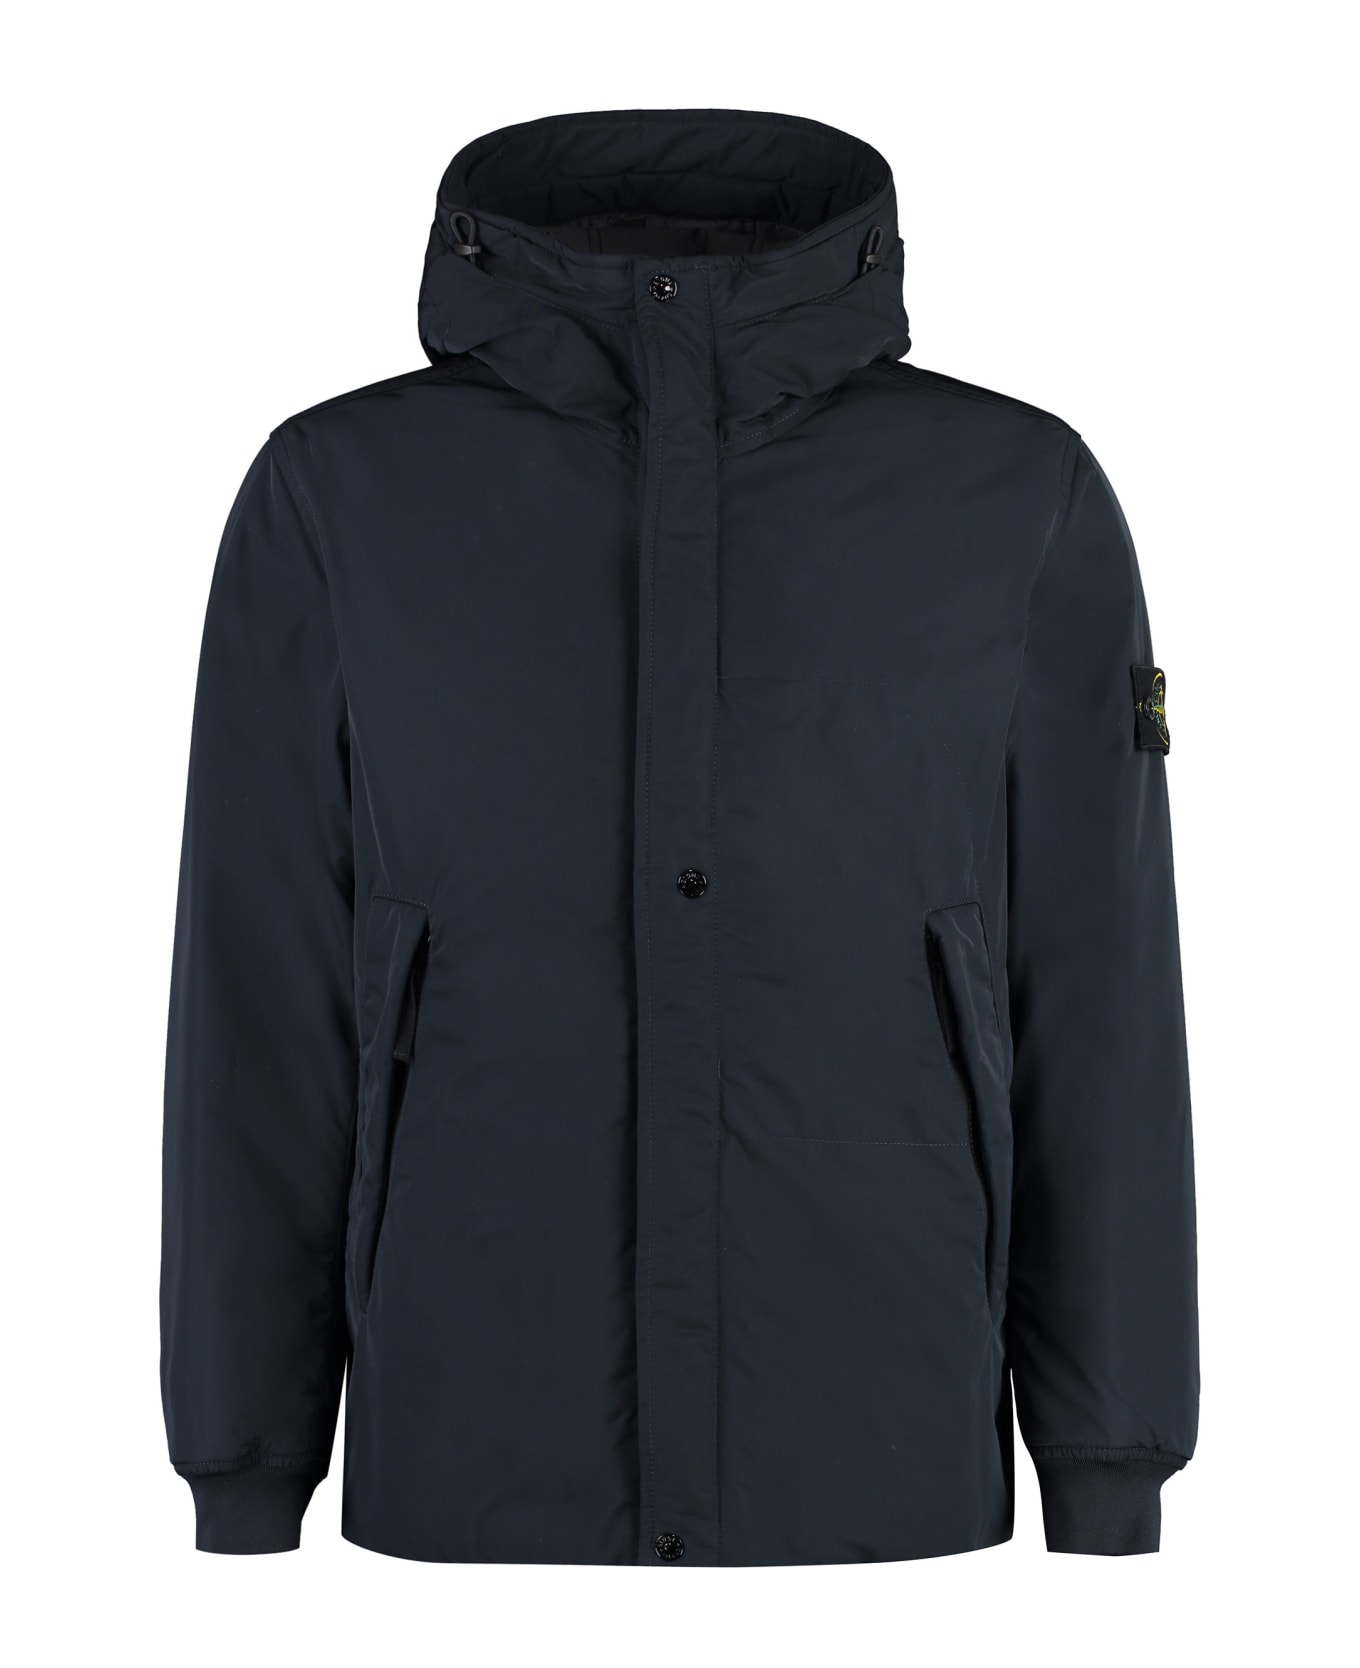 Stone Island Light Soft Shell Check Grid Jacket In Navy Blue - Blue